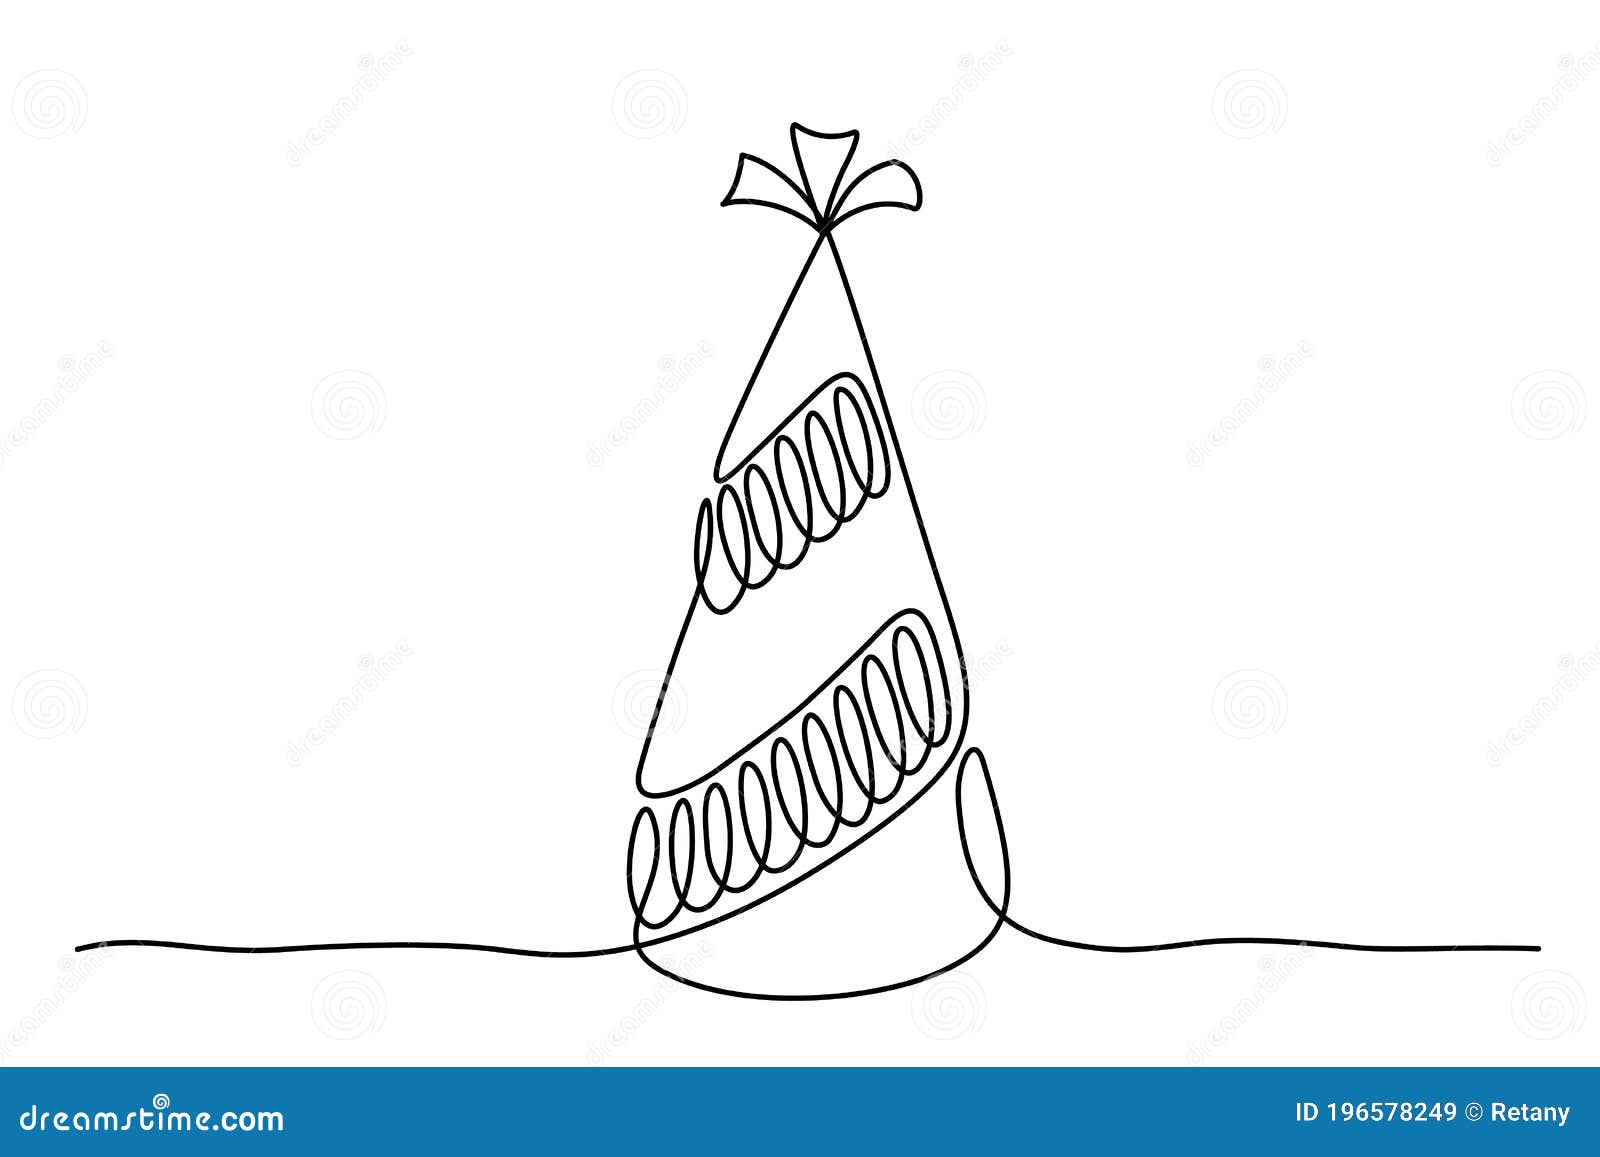 continuous line continuous line drawing party hat holiday cap symbol birthday black isolated white background hand drawn 196578249